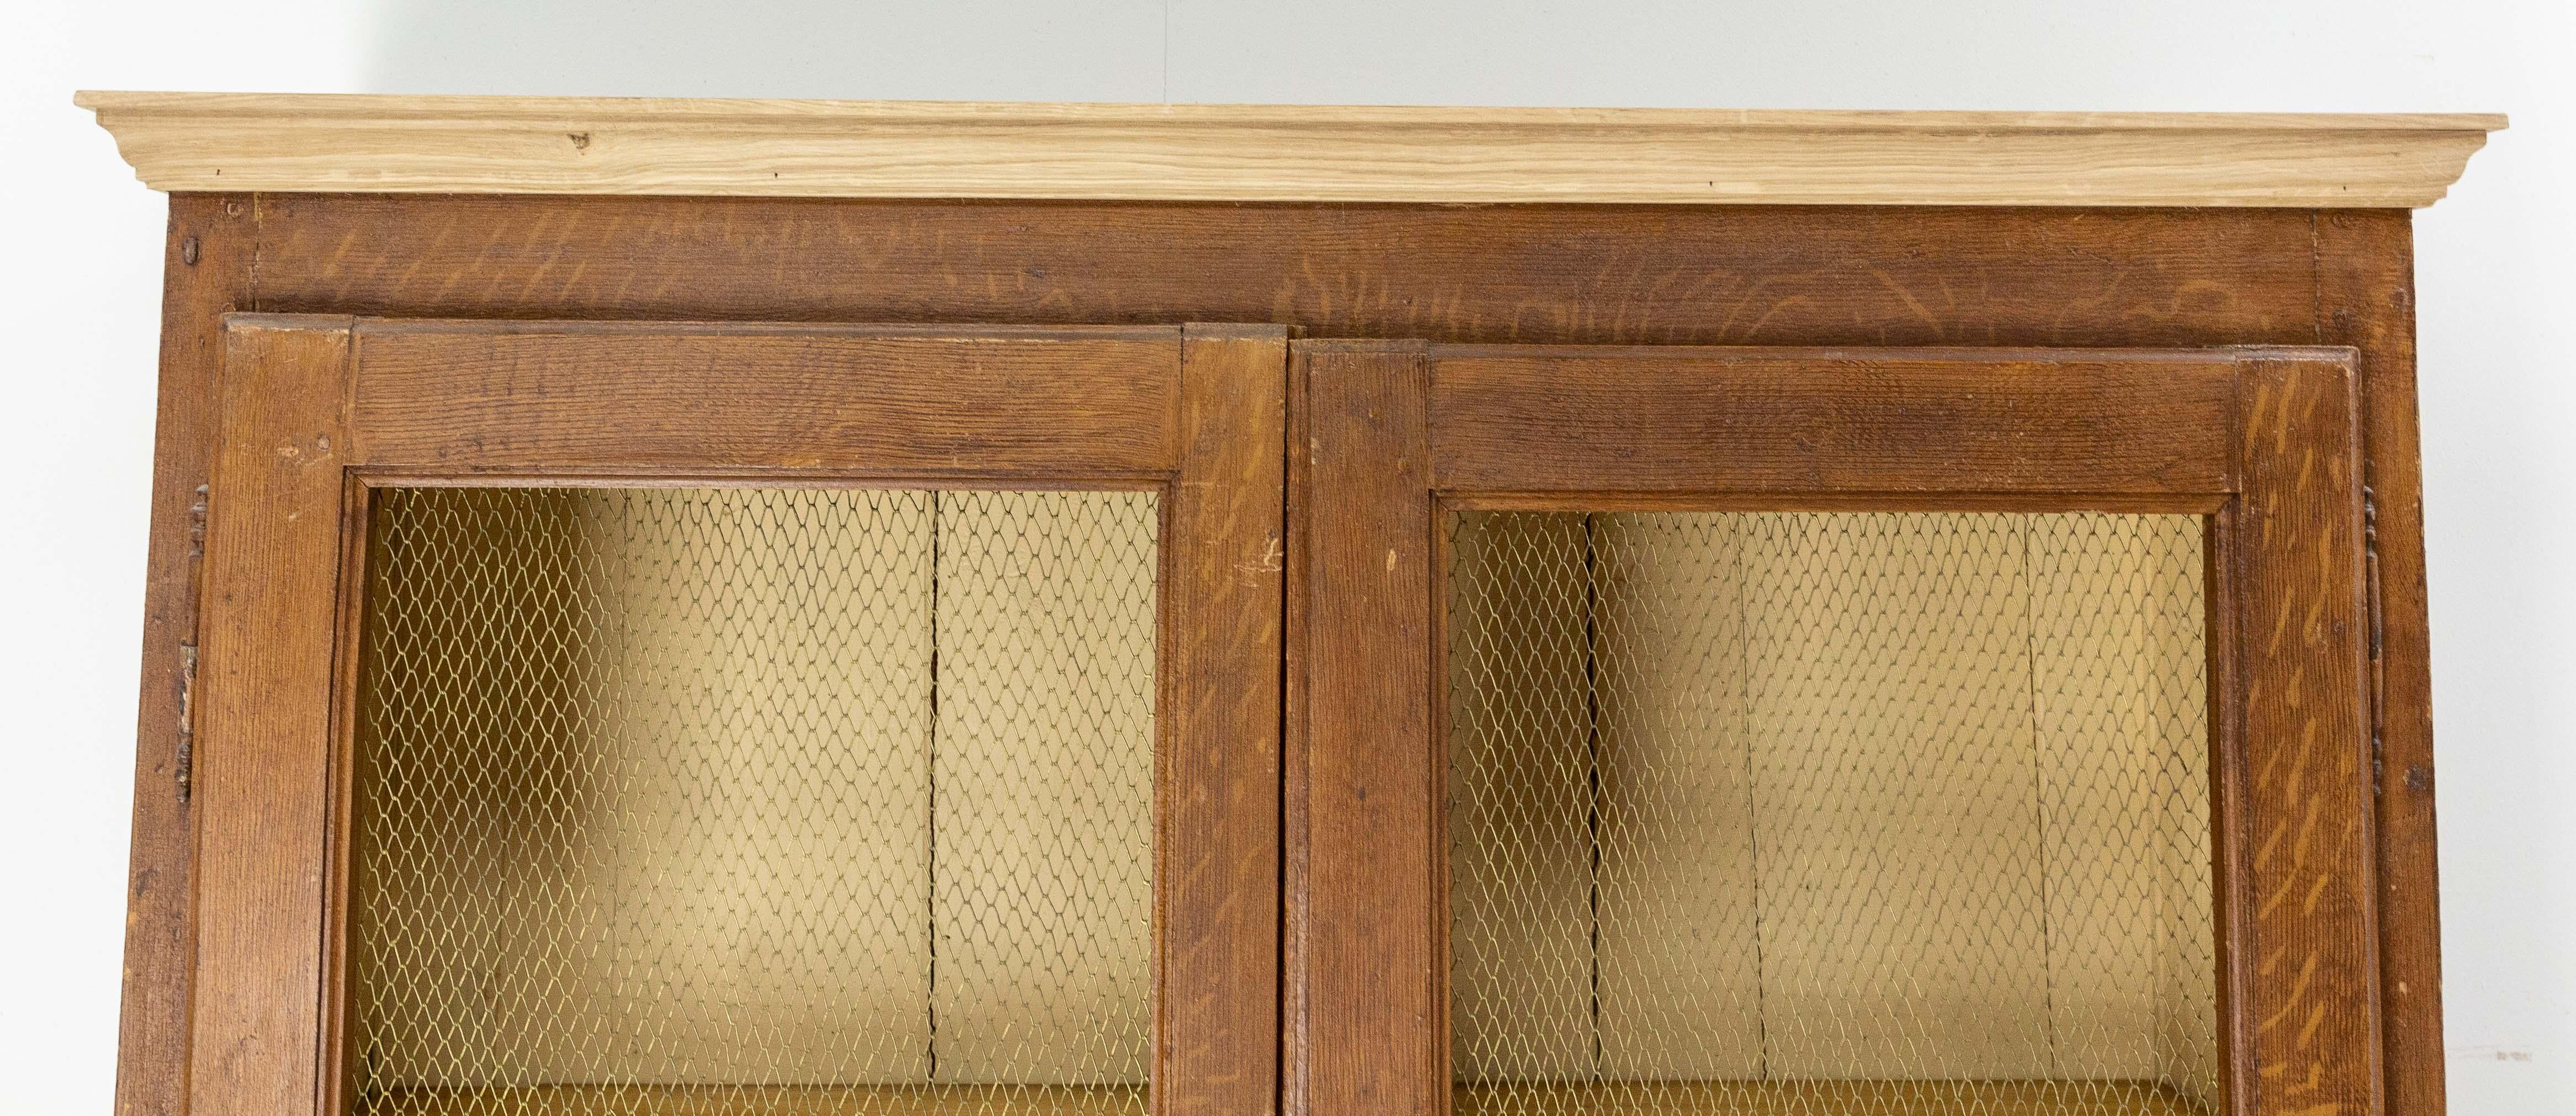 French Bookcase with Brass Mesh Doors Late 19th Century For Sale 3